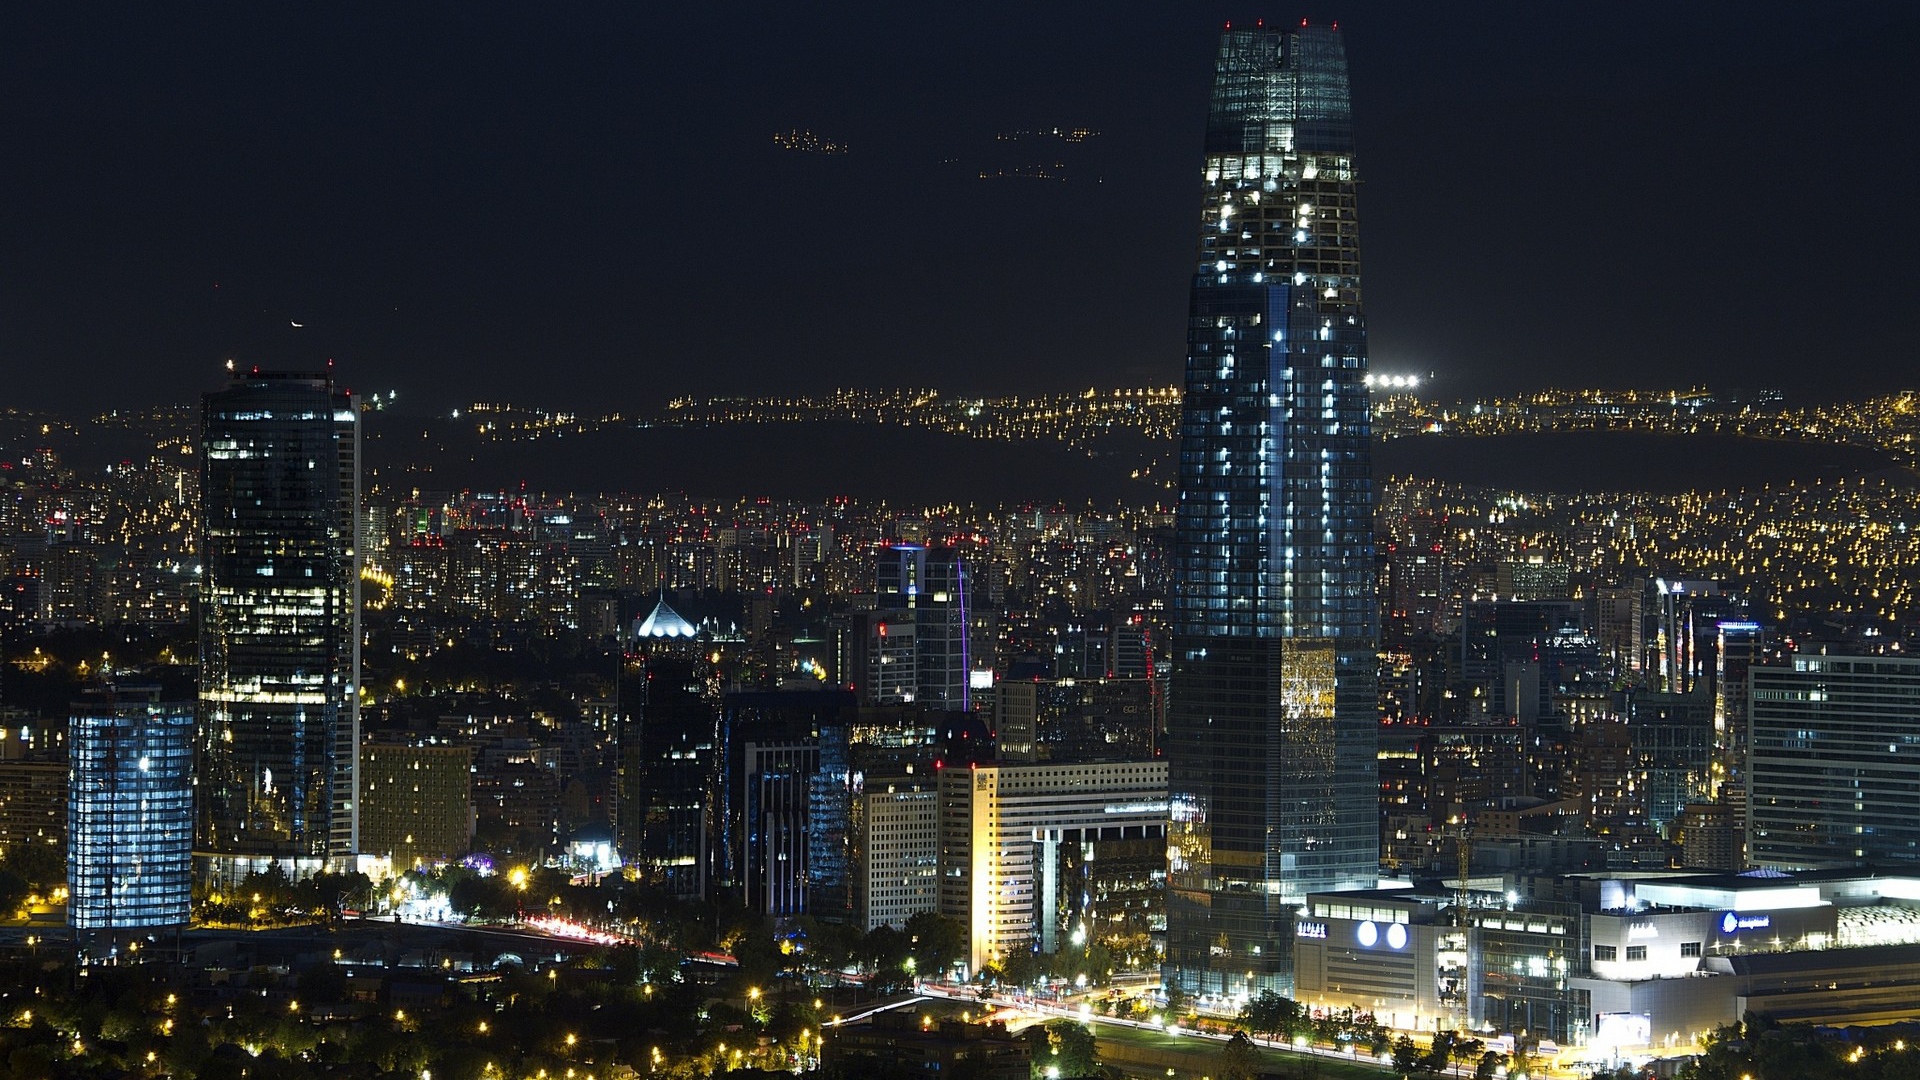 The lights of skyscrapers at night, the city of Santiago of Chile